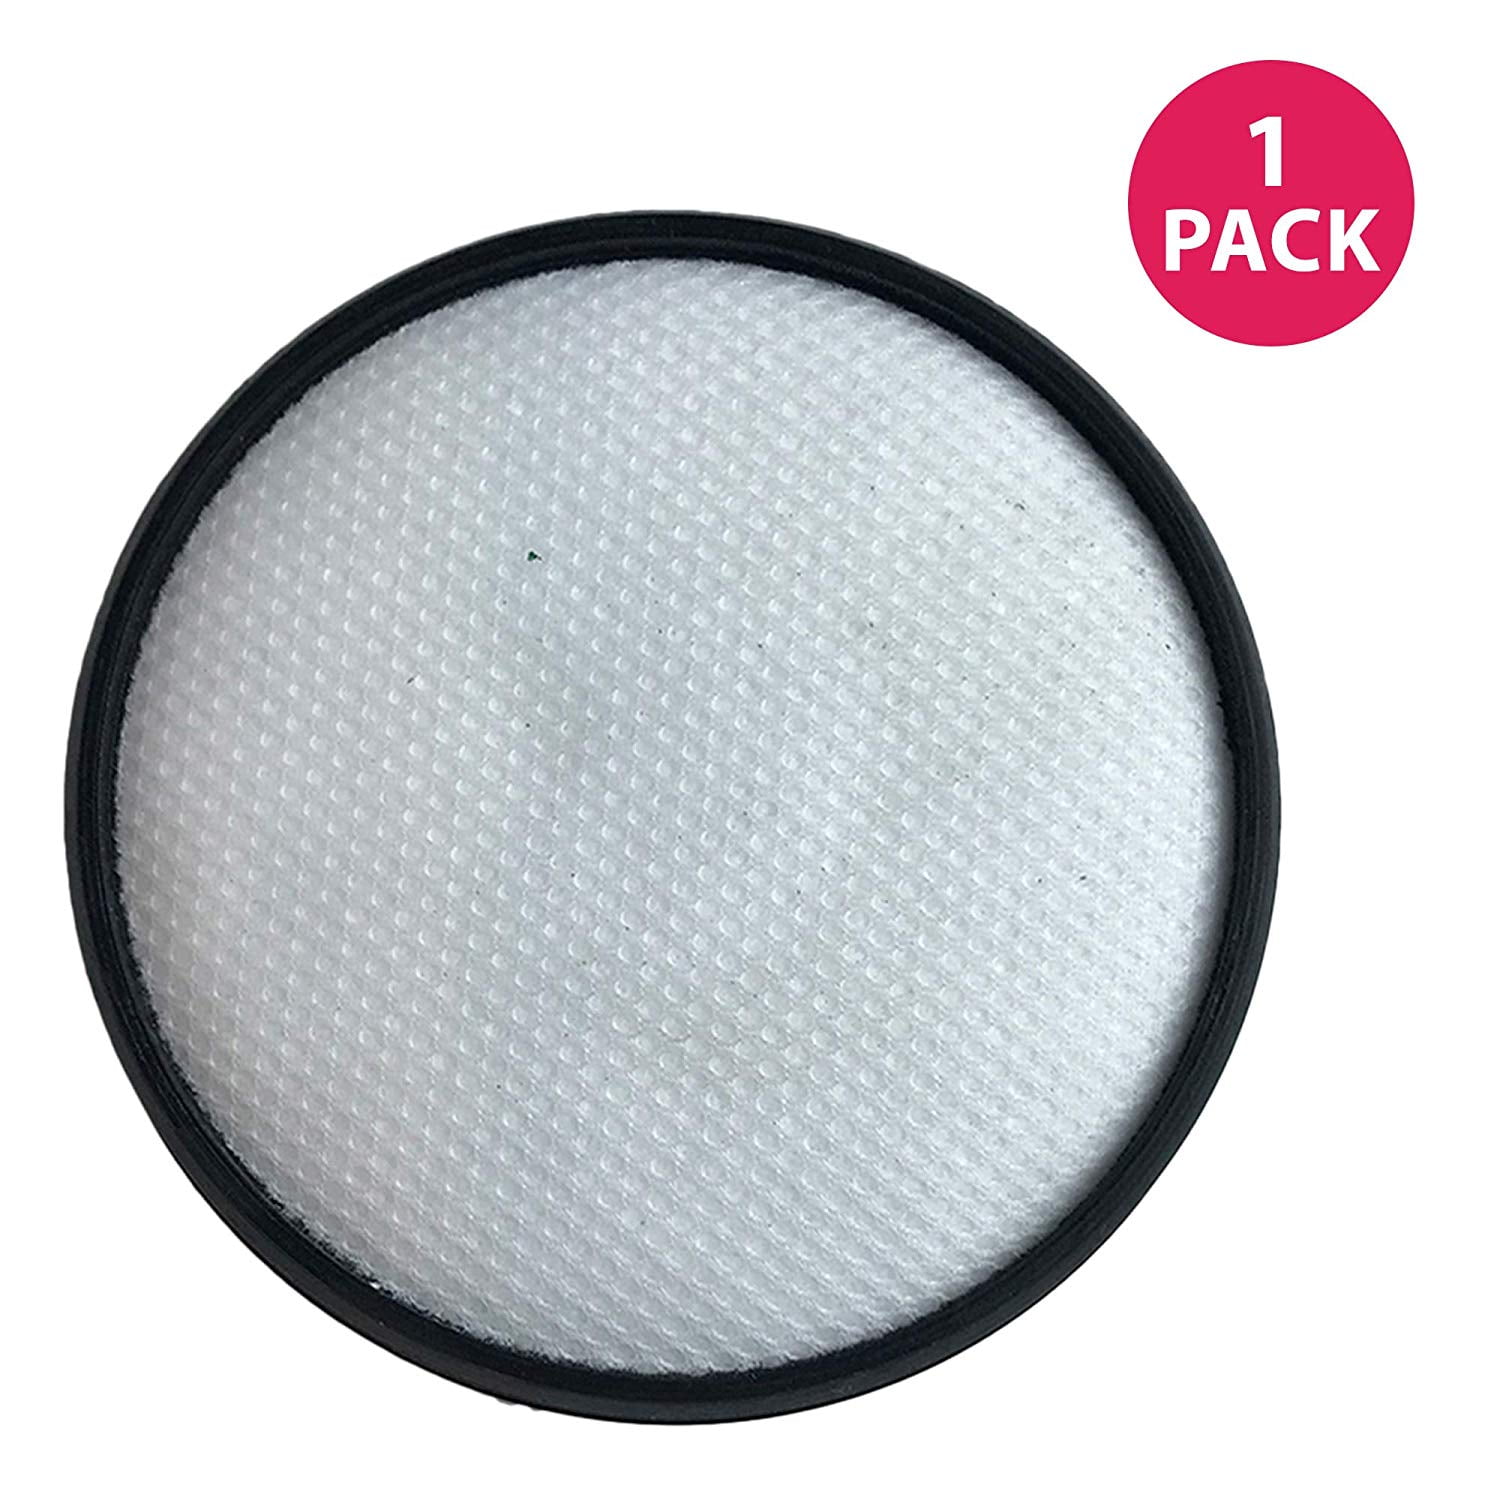 PUREBURG 2-Pack Replacement Vacuum Primary Air Filters Compatible with Hoover Windtunnel 3 Pro Steerable Pet Bagless Upright Replace Part# 303903001 fits UH70905 UH72400 UH70400 